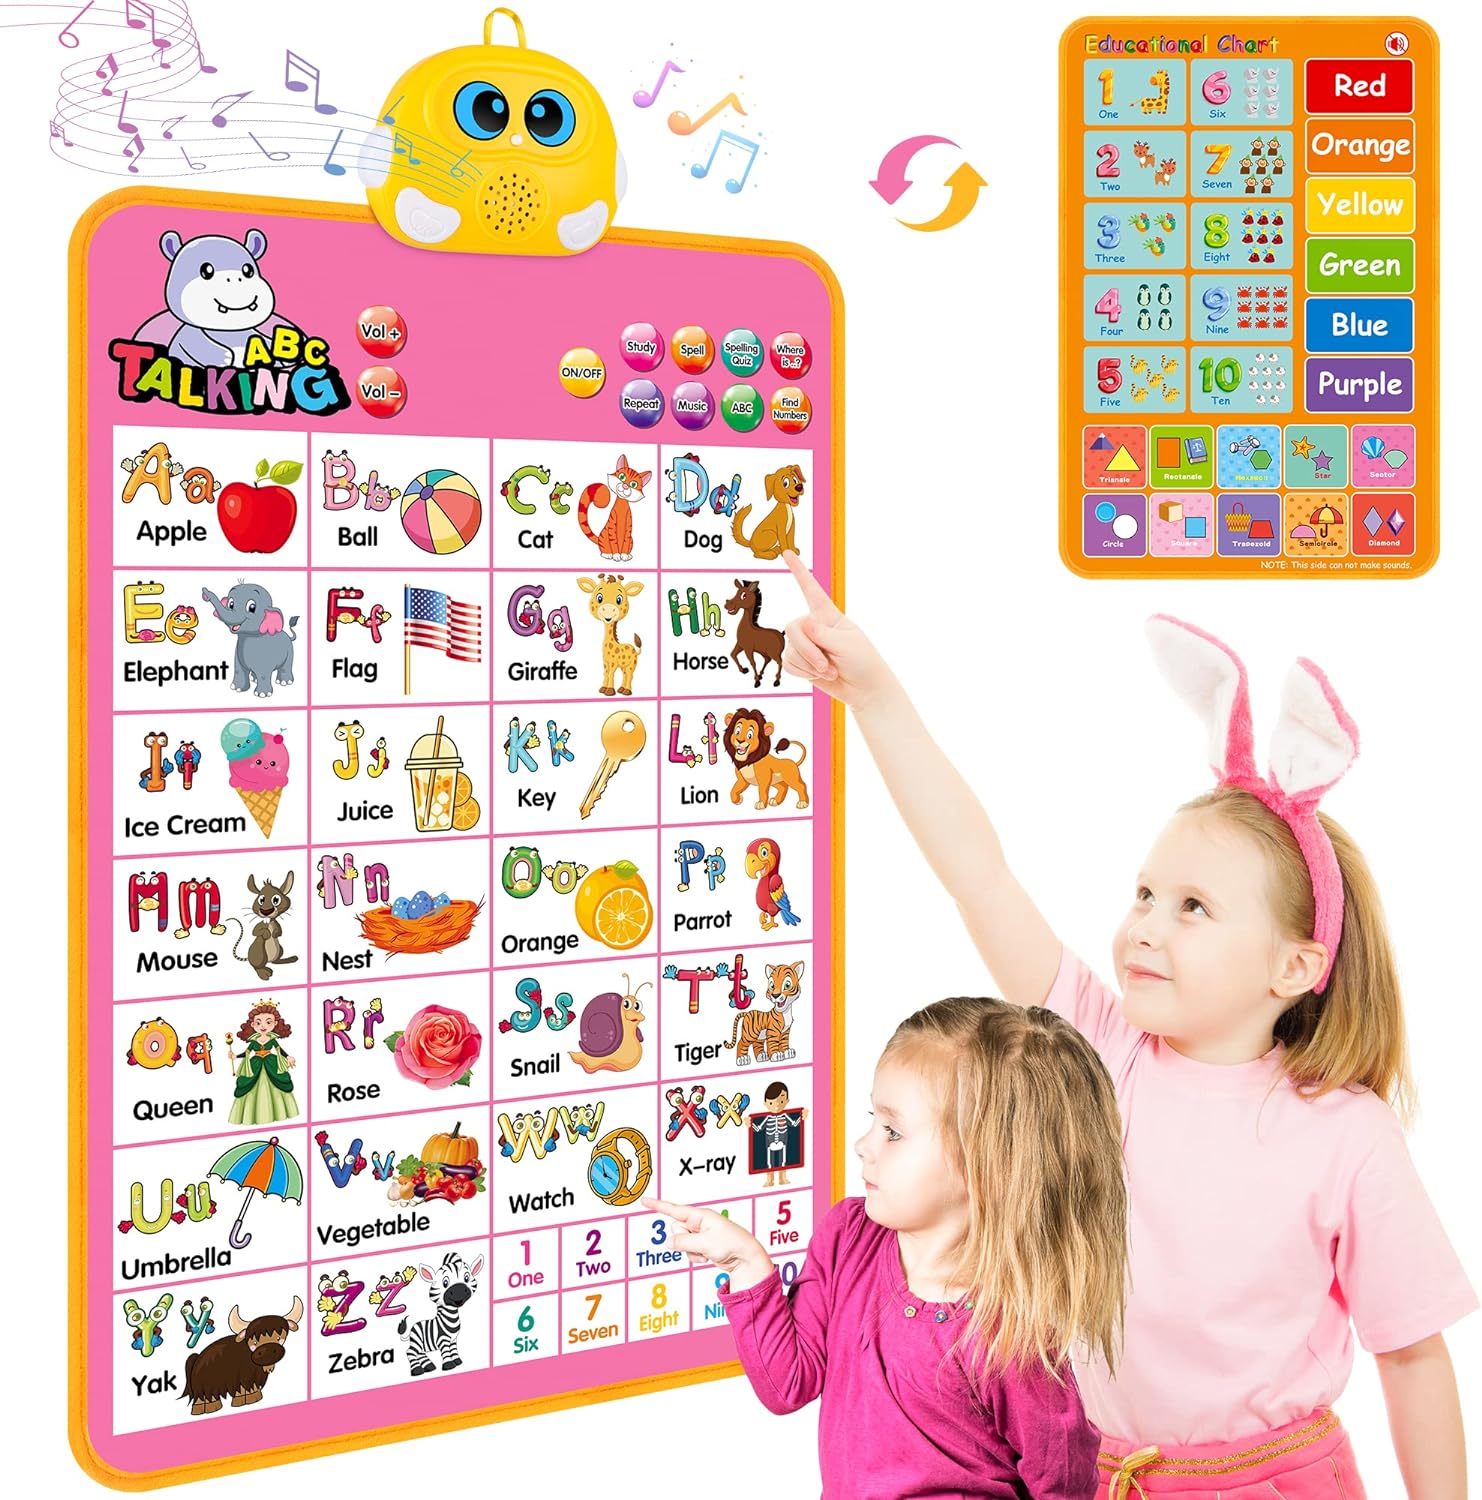 Electronic Alphabet Wall Chart, Talking ABC, 123s, Music Poster, Kids Learning Toys